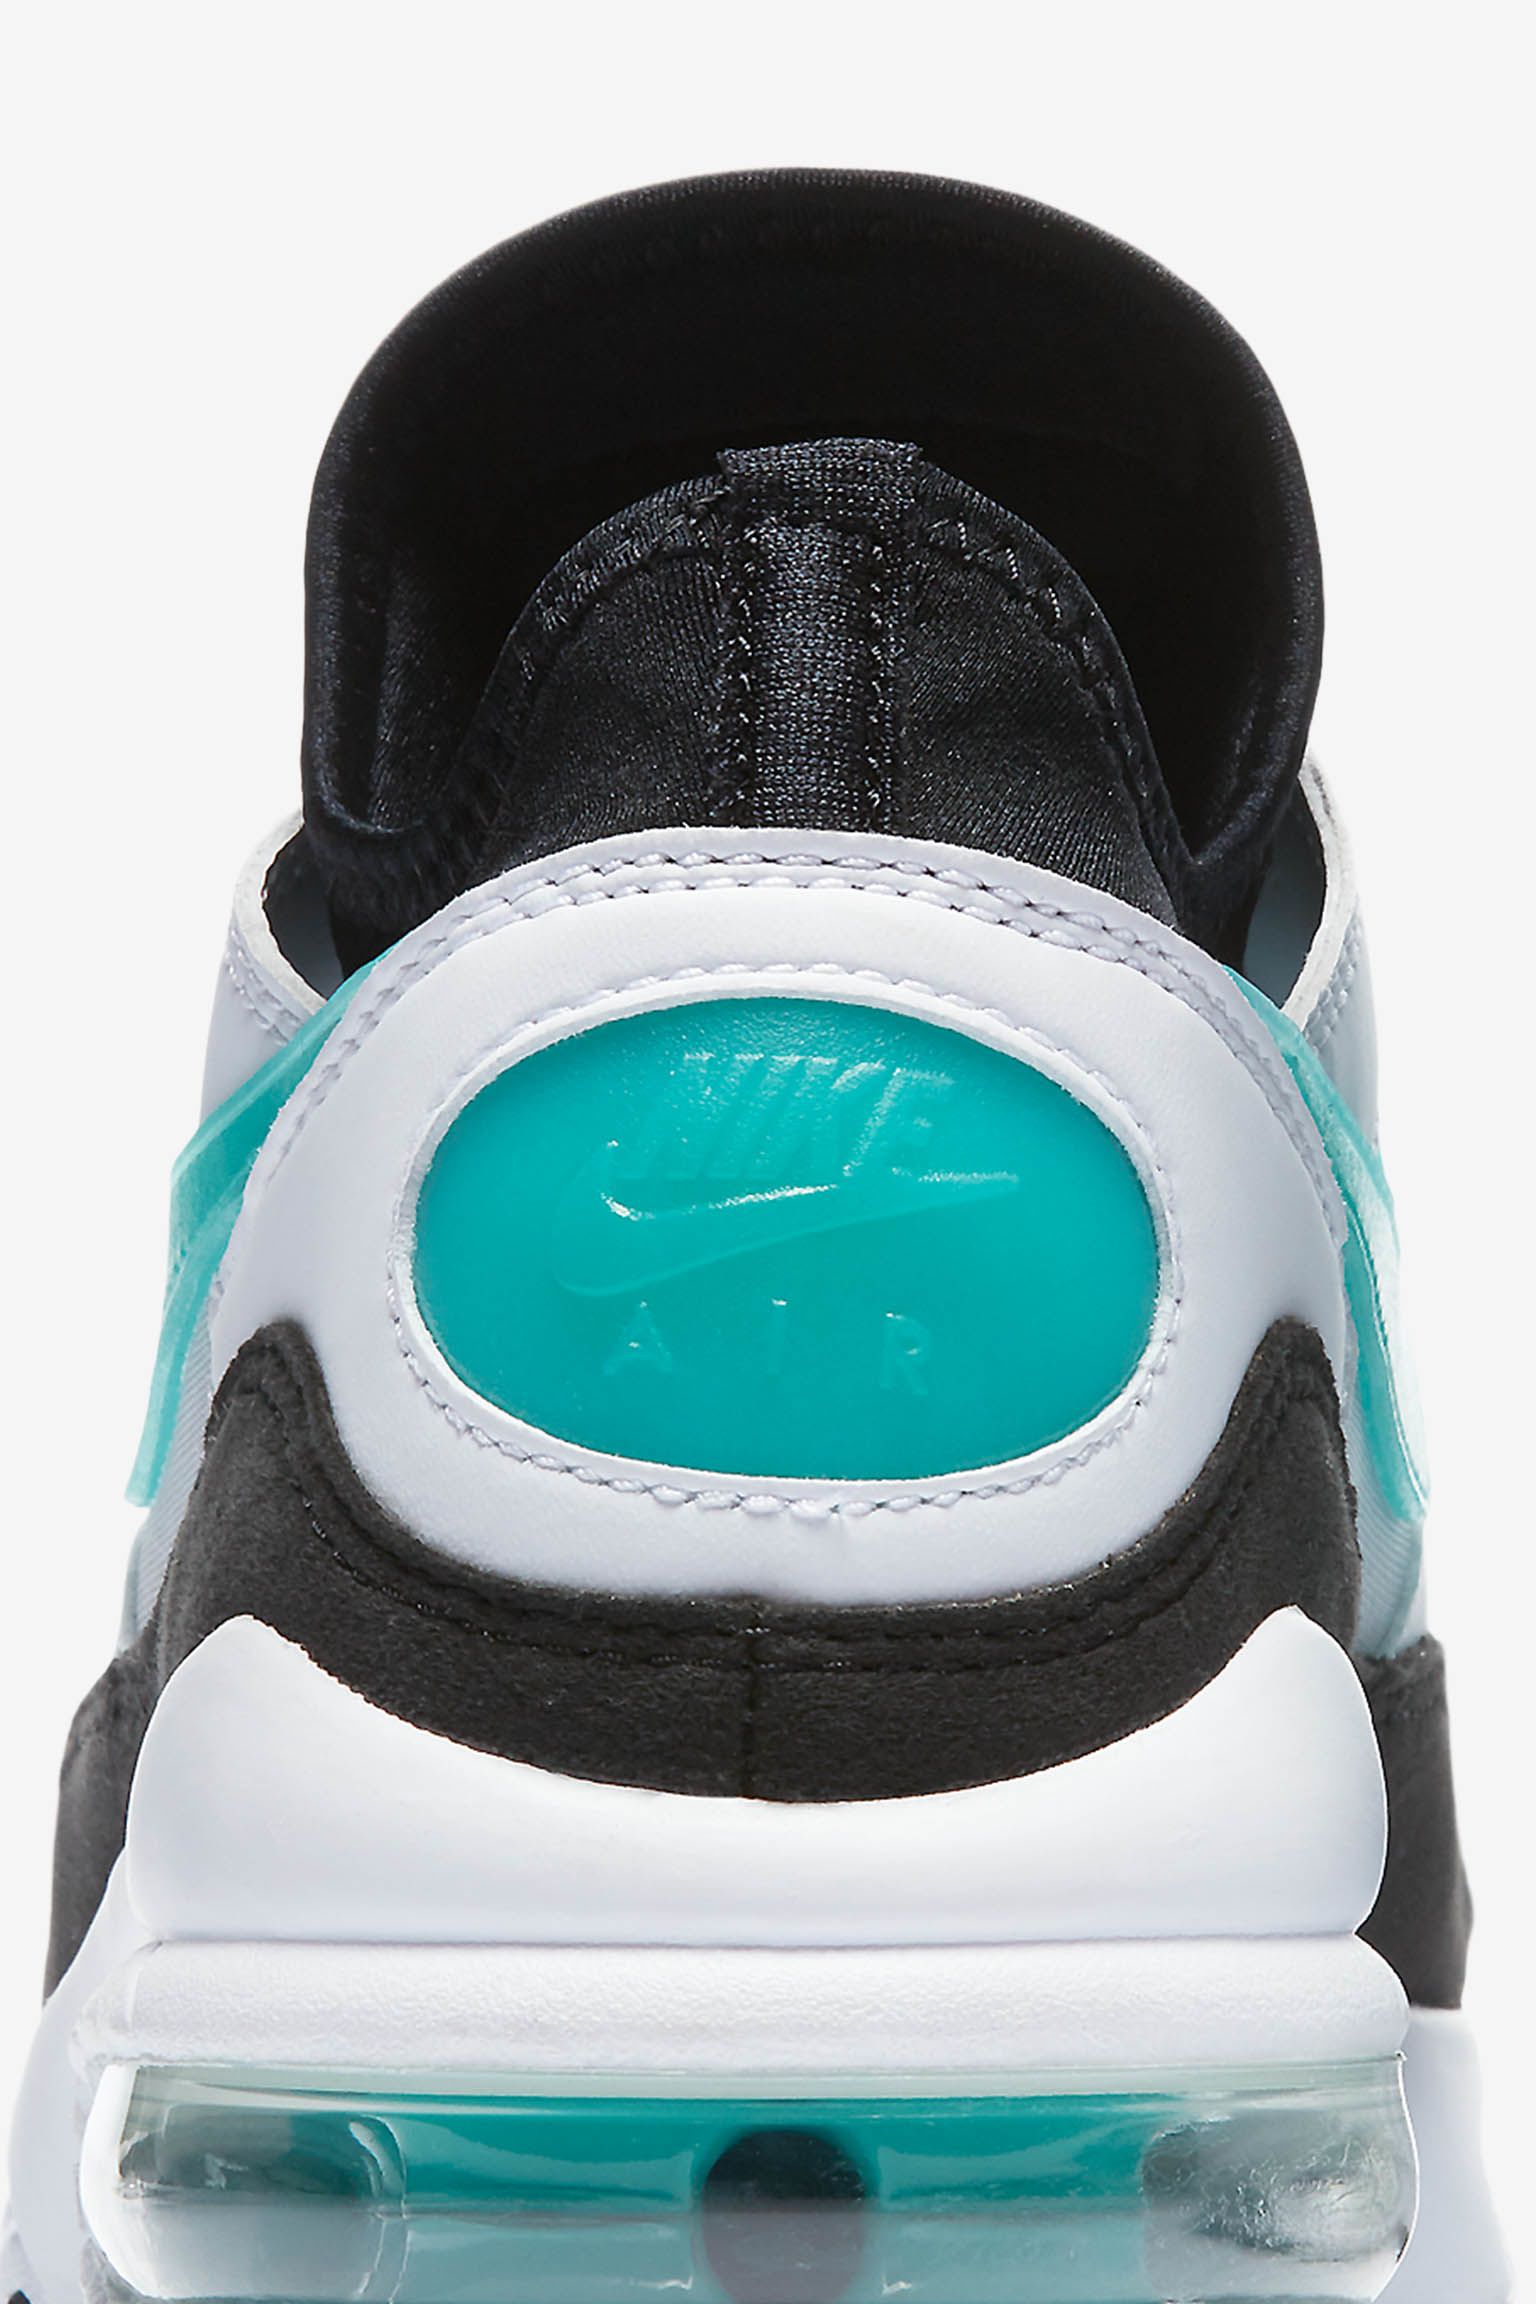 Nike Women's Air Max 93 'White & Sport Turquoise' Release Date ...